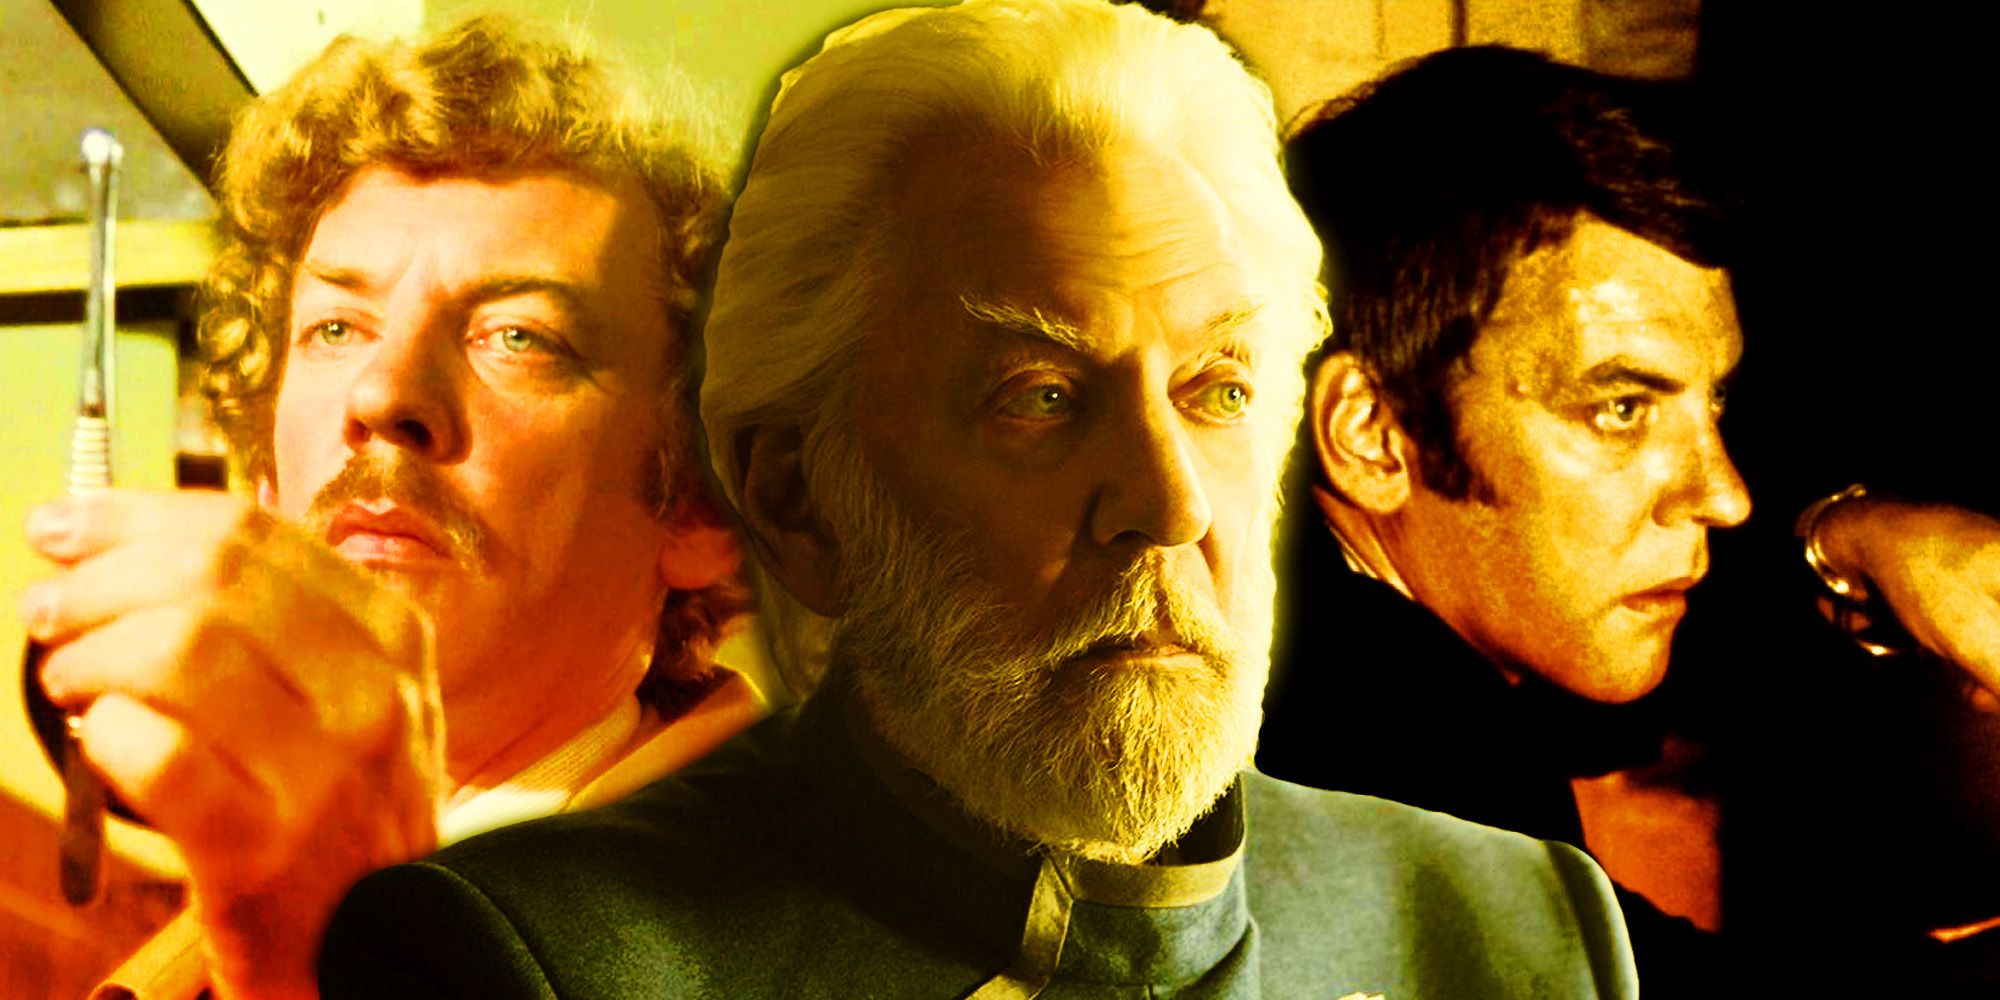 Donald Sutherland his characters in Klute, Invasion of the Body Snatchers, and The Hunger Games